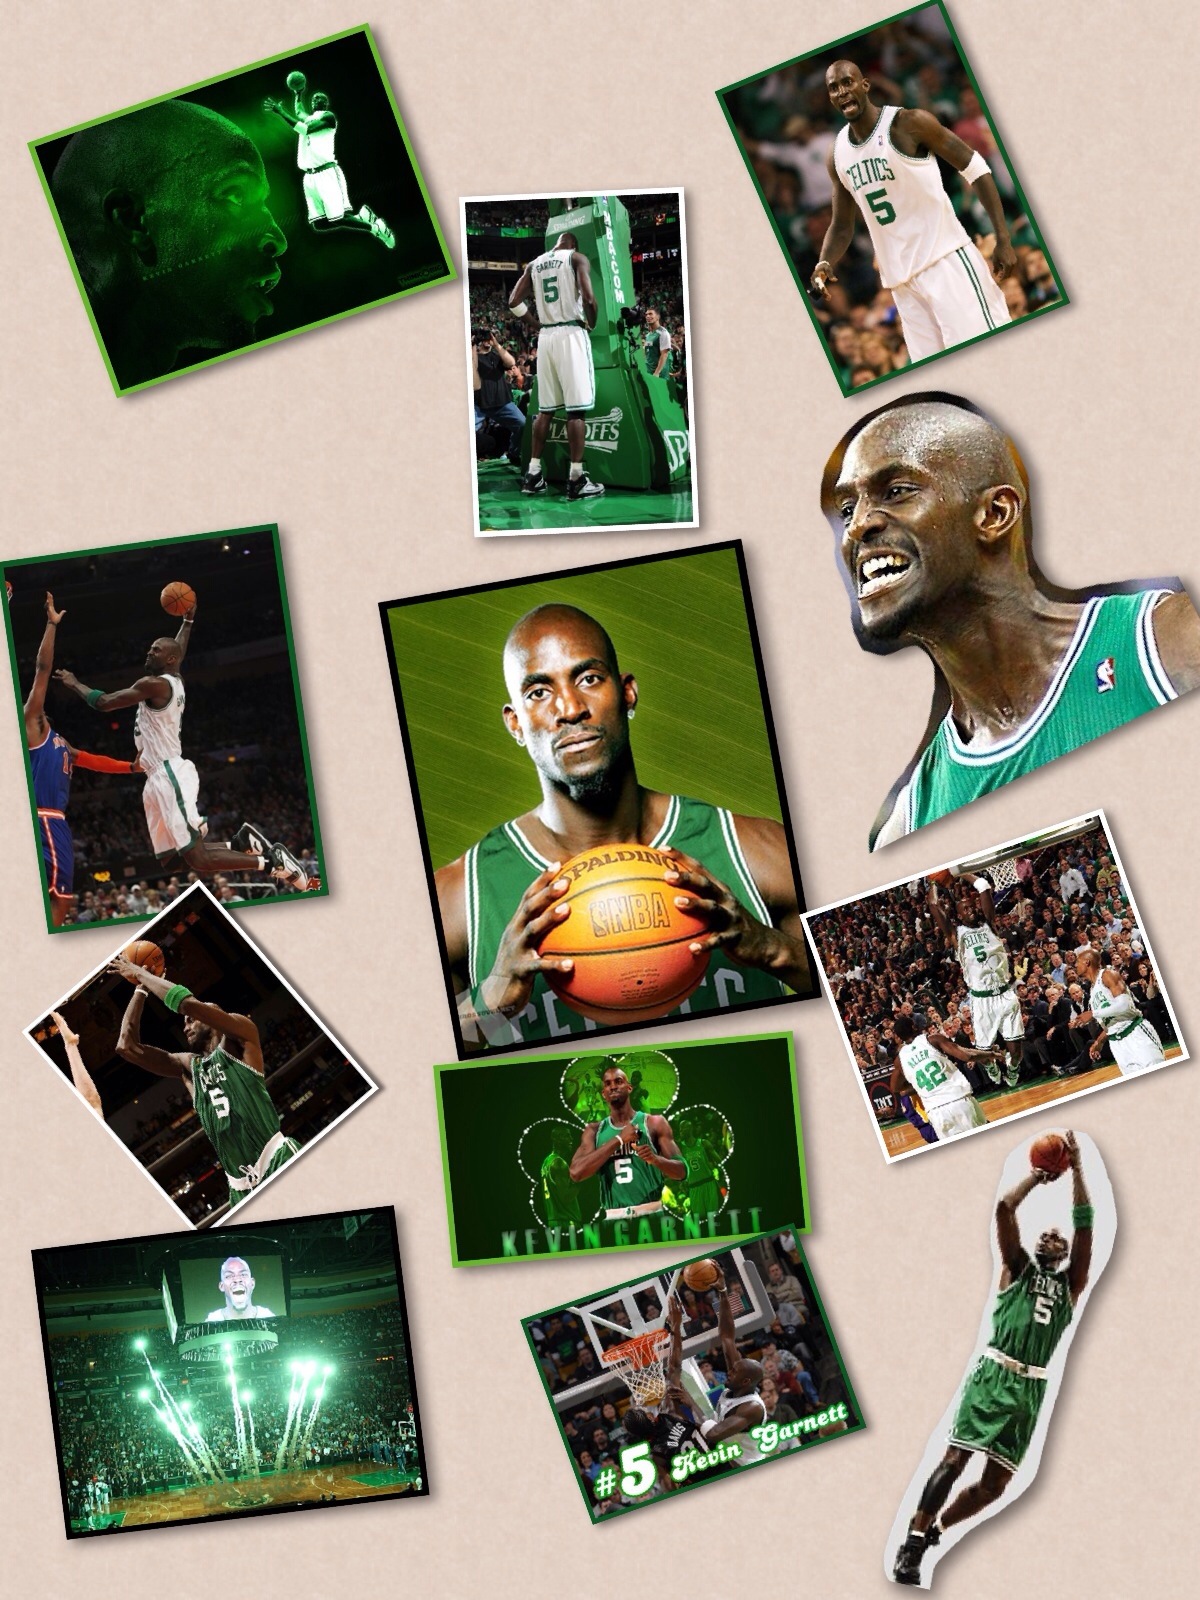 there are pictures of basketball players and people